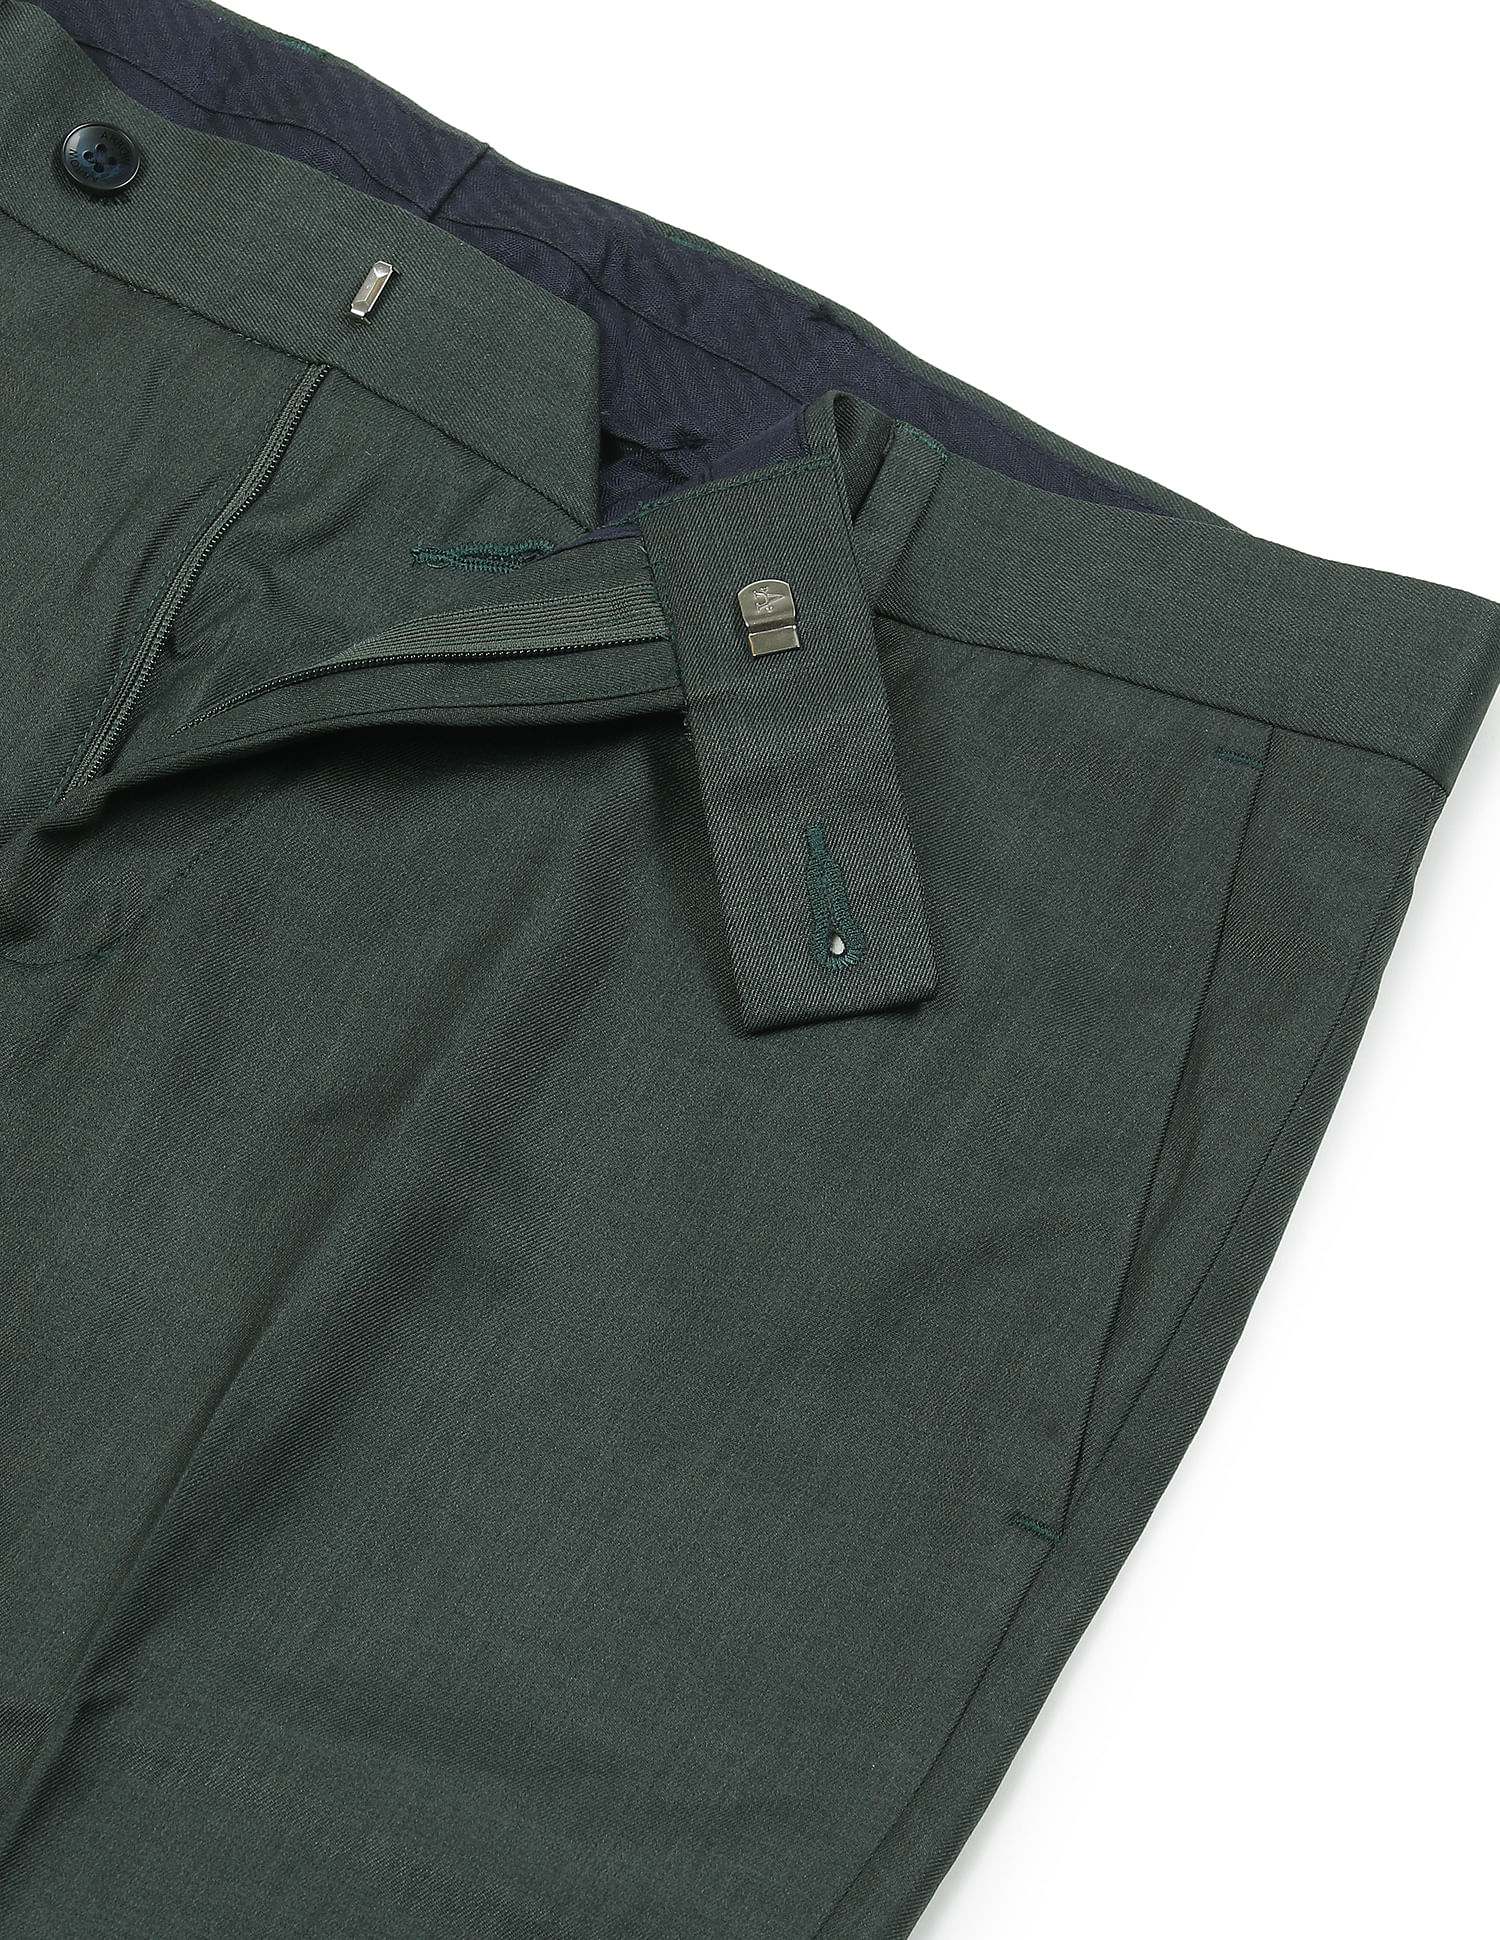 Cotton Men Imported Fabric Bottle Green Pant